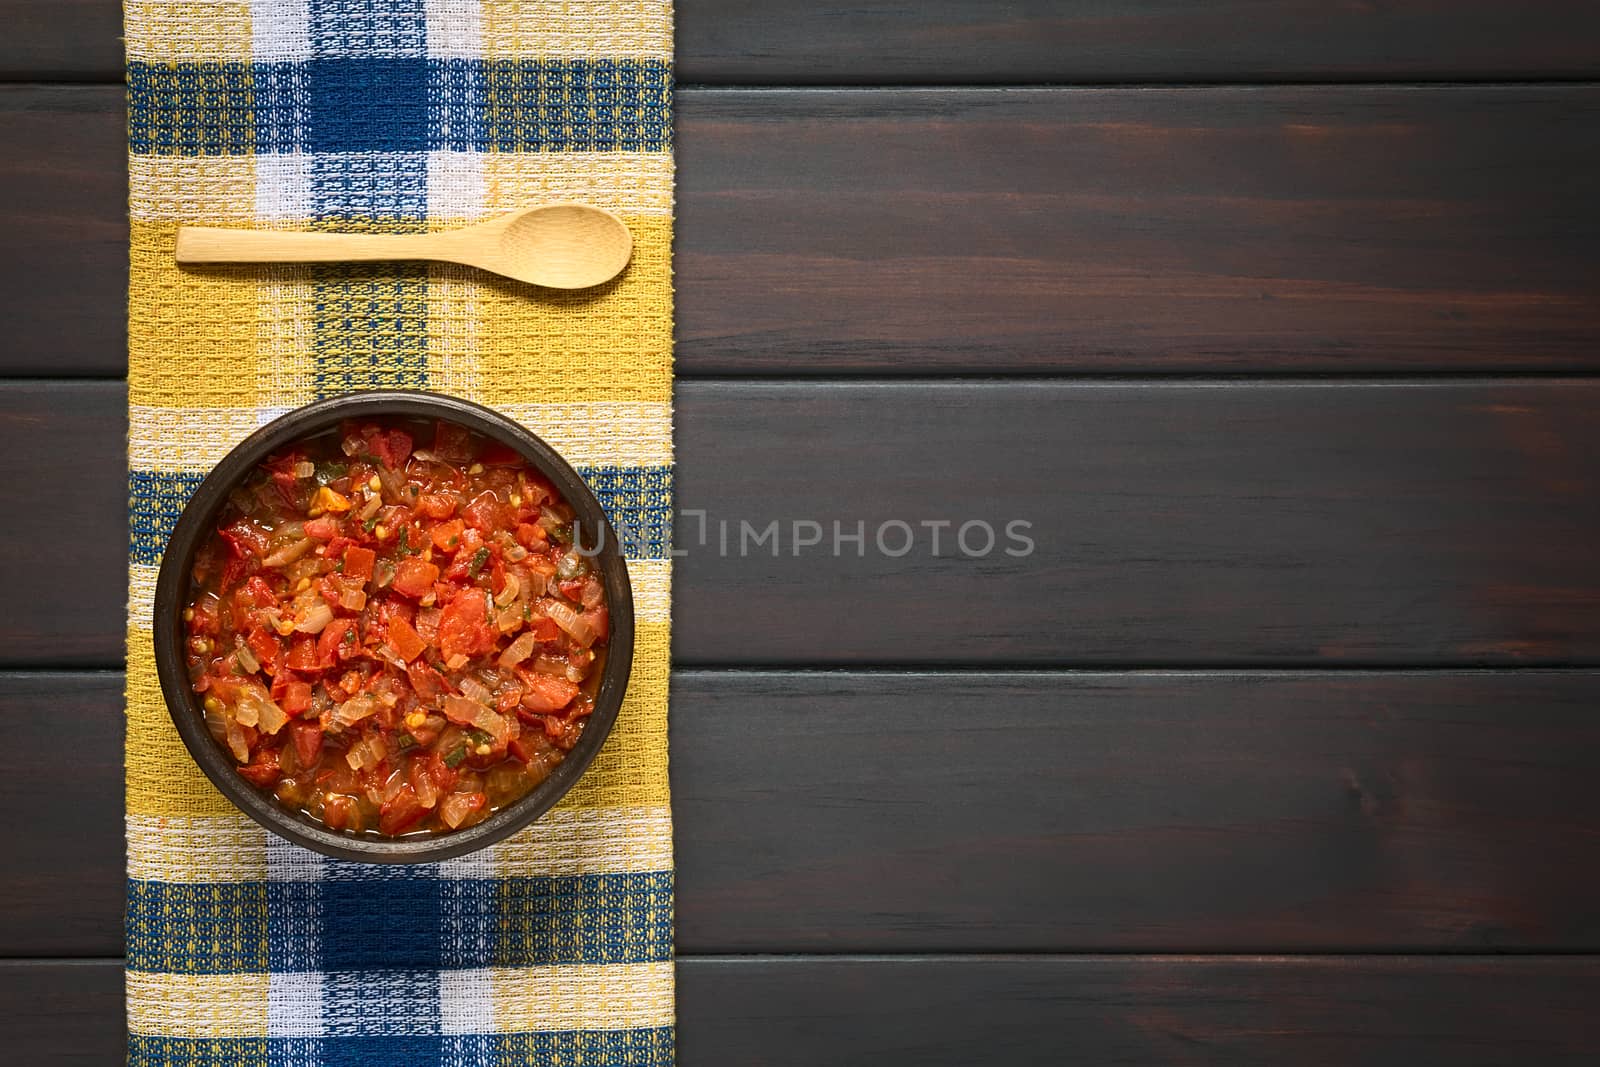 Overhead shot of Colombian hogao or criollo sauce (salsa criolla) made of cooked onion and tomato, served as accompaniment to traditional dishes. Photographed on dark wood with natural light.